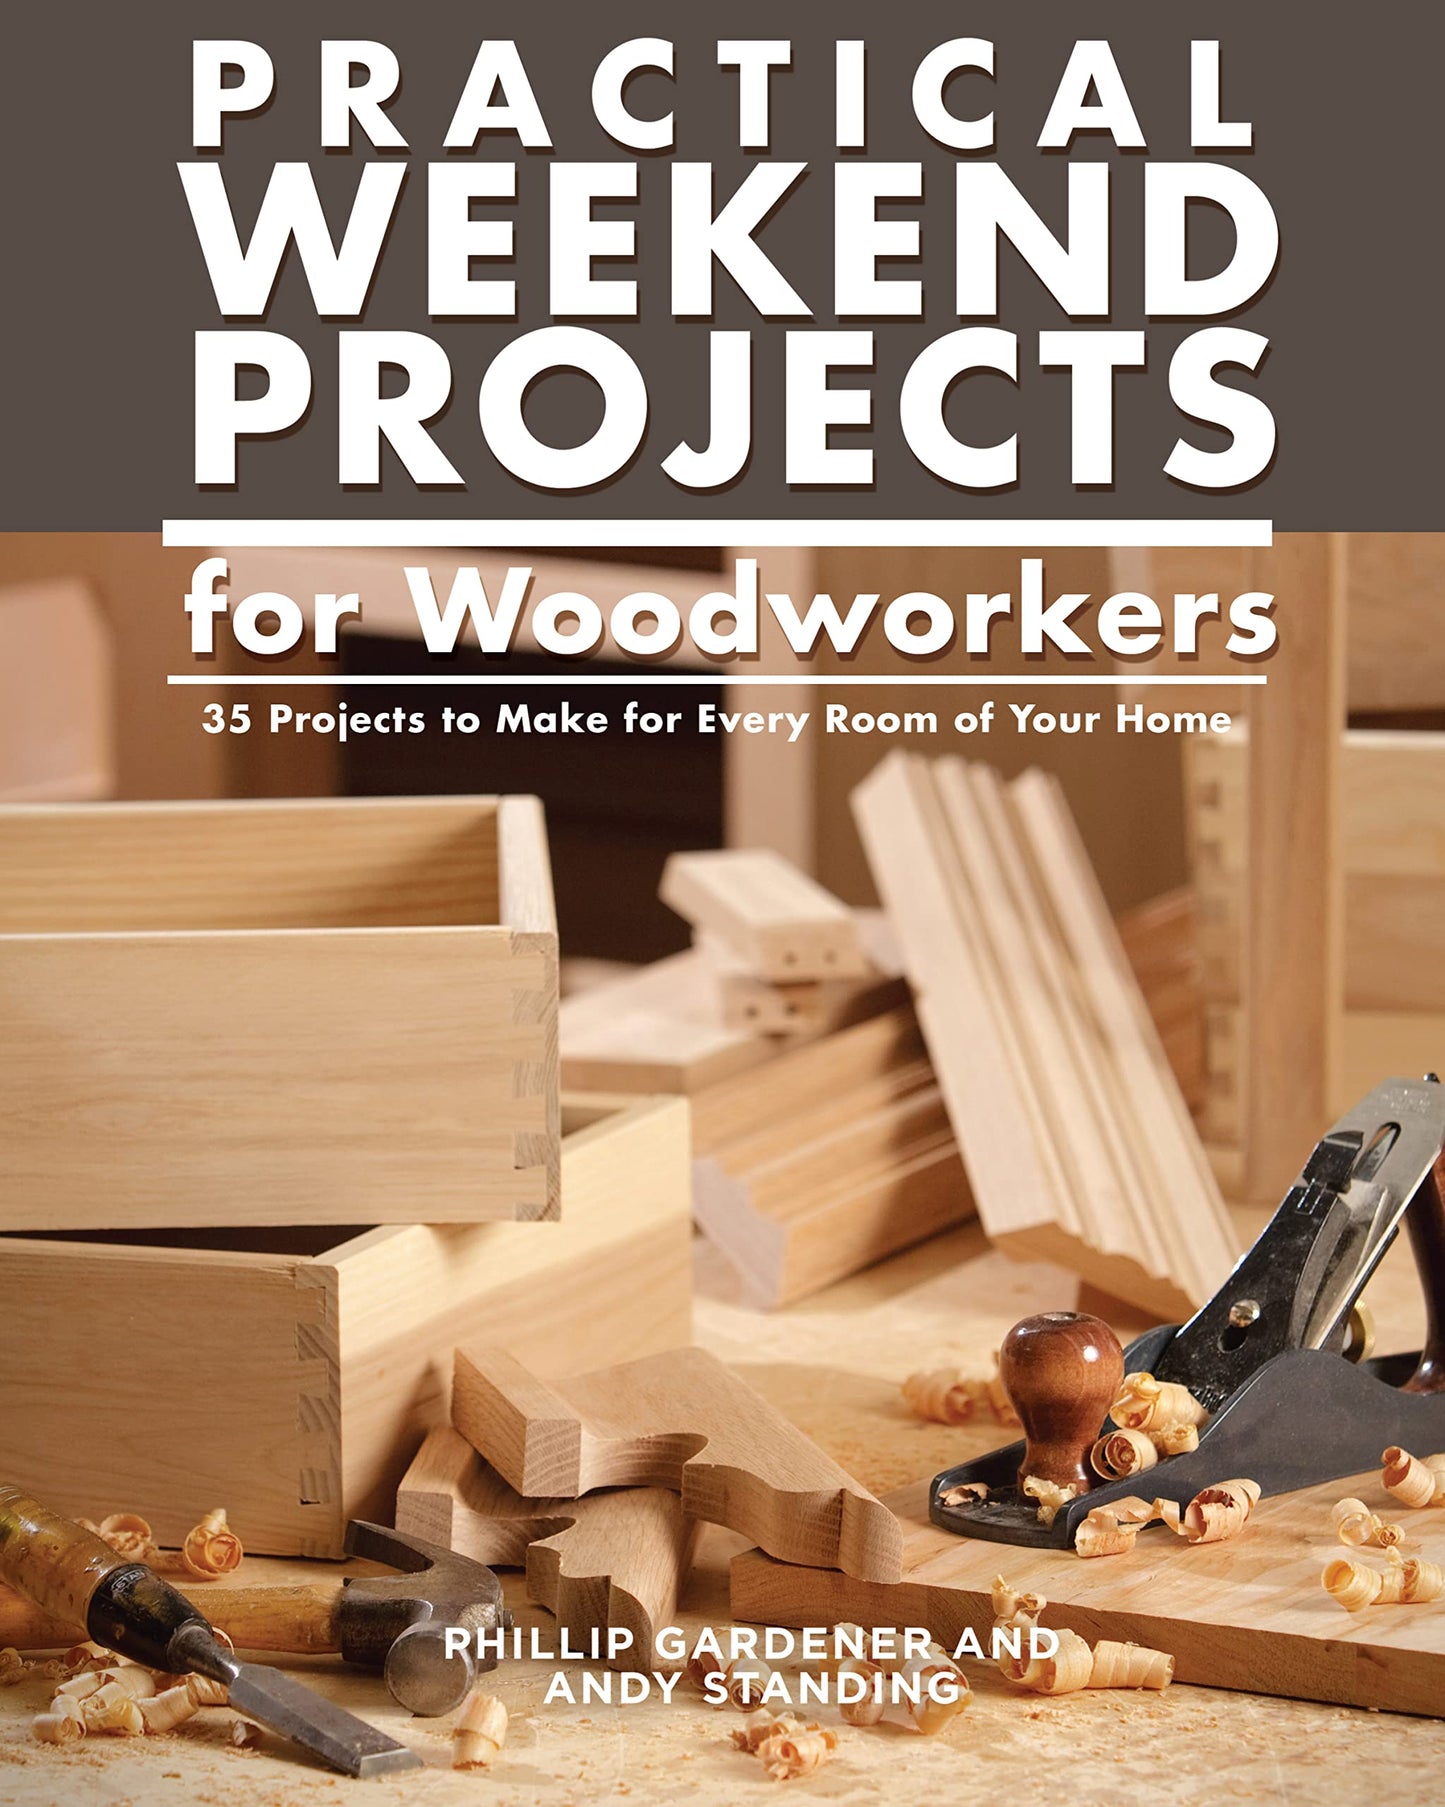 Practical Weekend Projects for Woodworkers: 35 Projects to Make for Every Room of Your Home (IMM Lifestyle Books) Easy Step-by-Step Instructions with